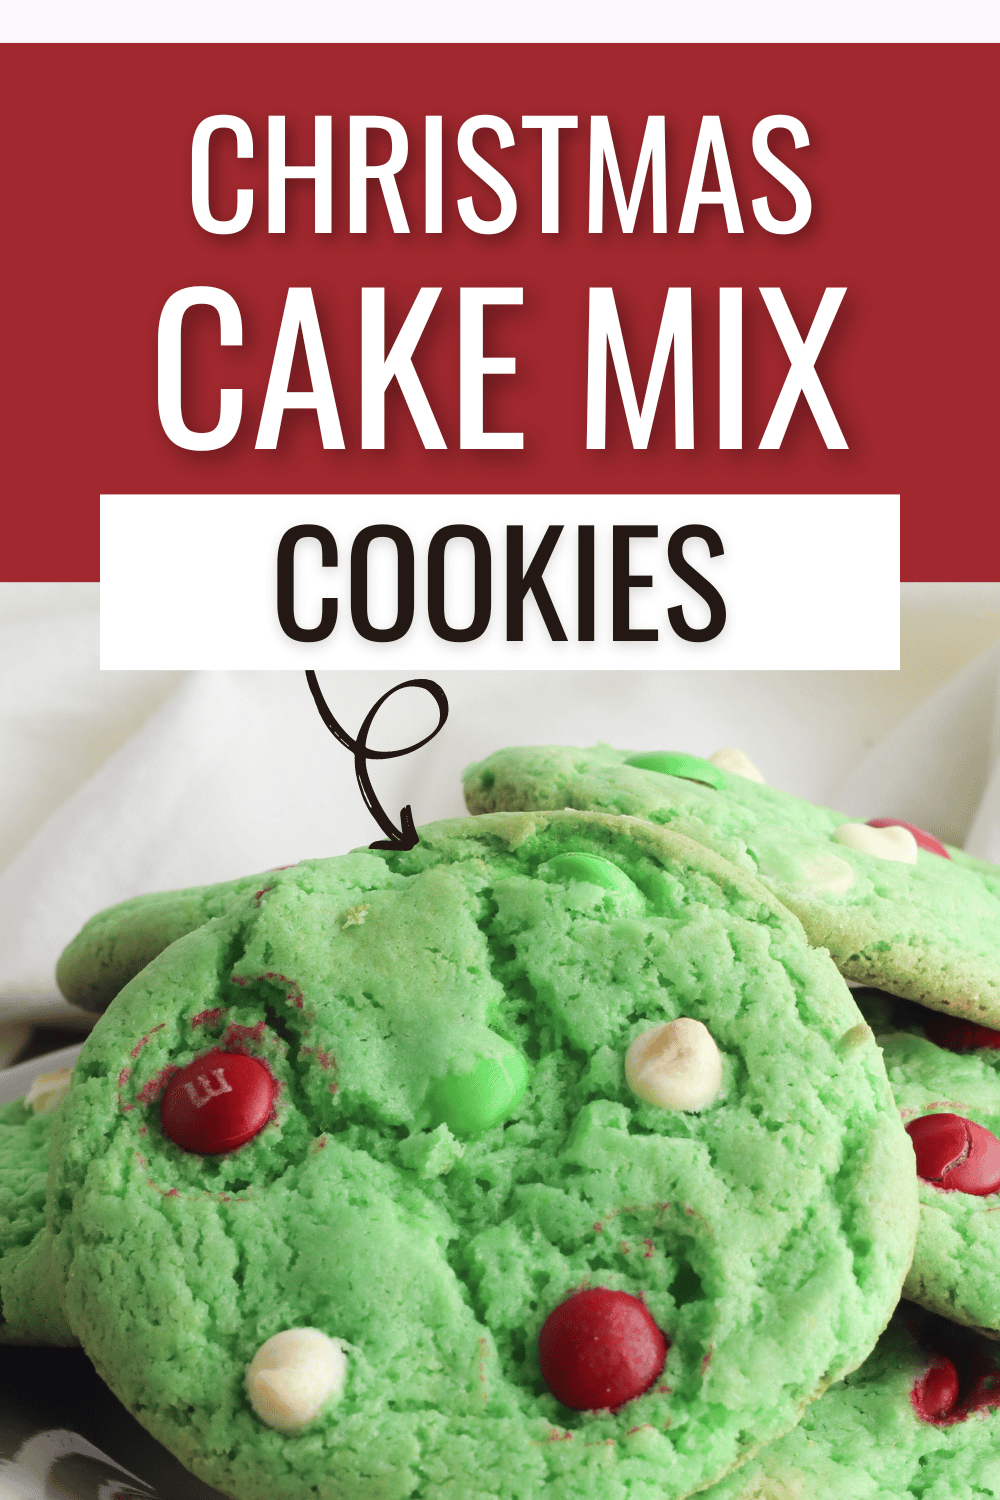 These Christmas Cake Mix Cookies are soft and chewy cookies that are filled to the brim with white chocolate chips and M&M’s. #cakemixcookies #christmascookies #cookies #christmas via @wondermomwannab